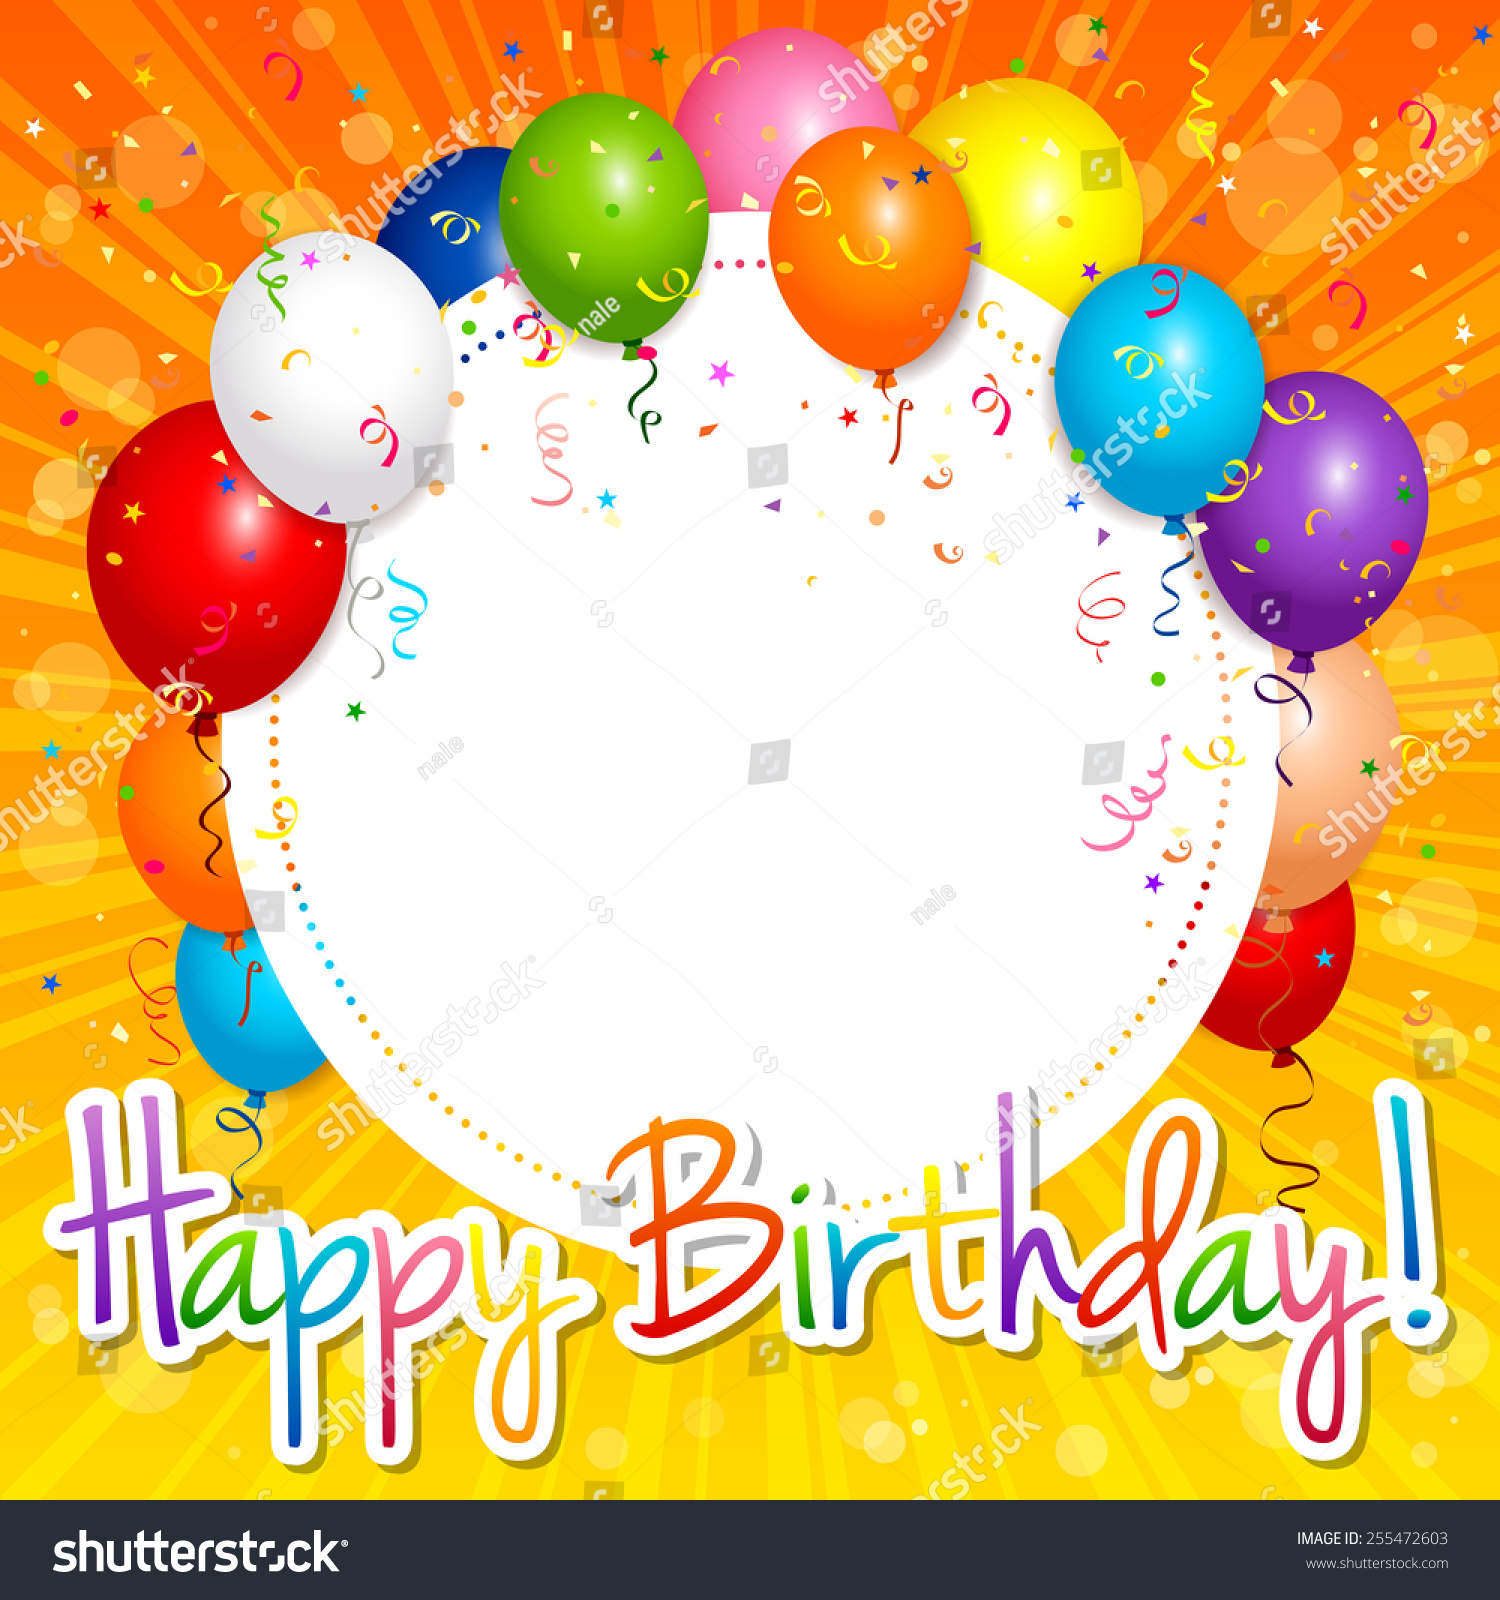 Eps 10 Vector Illustration Of Happy Birthday Card. Used Opacity And ...